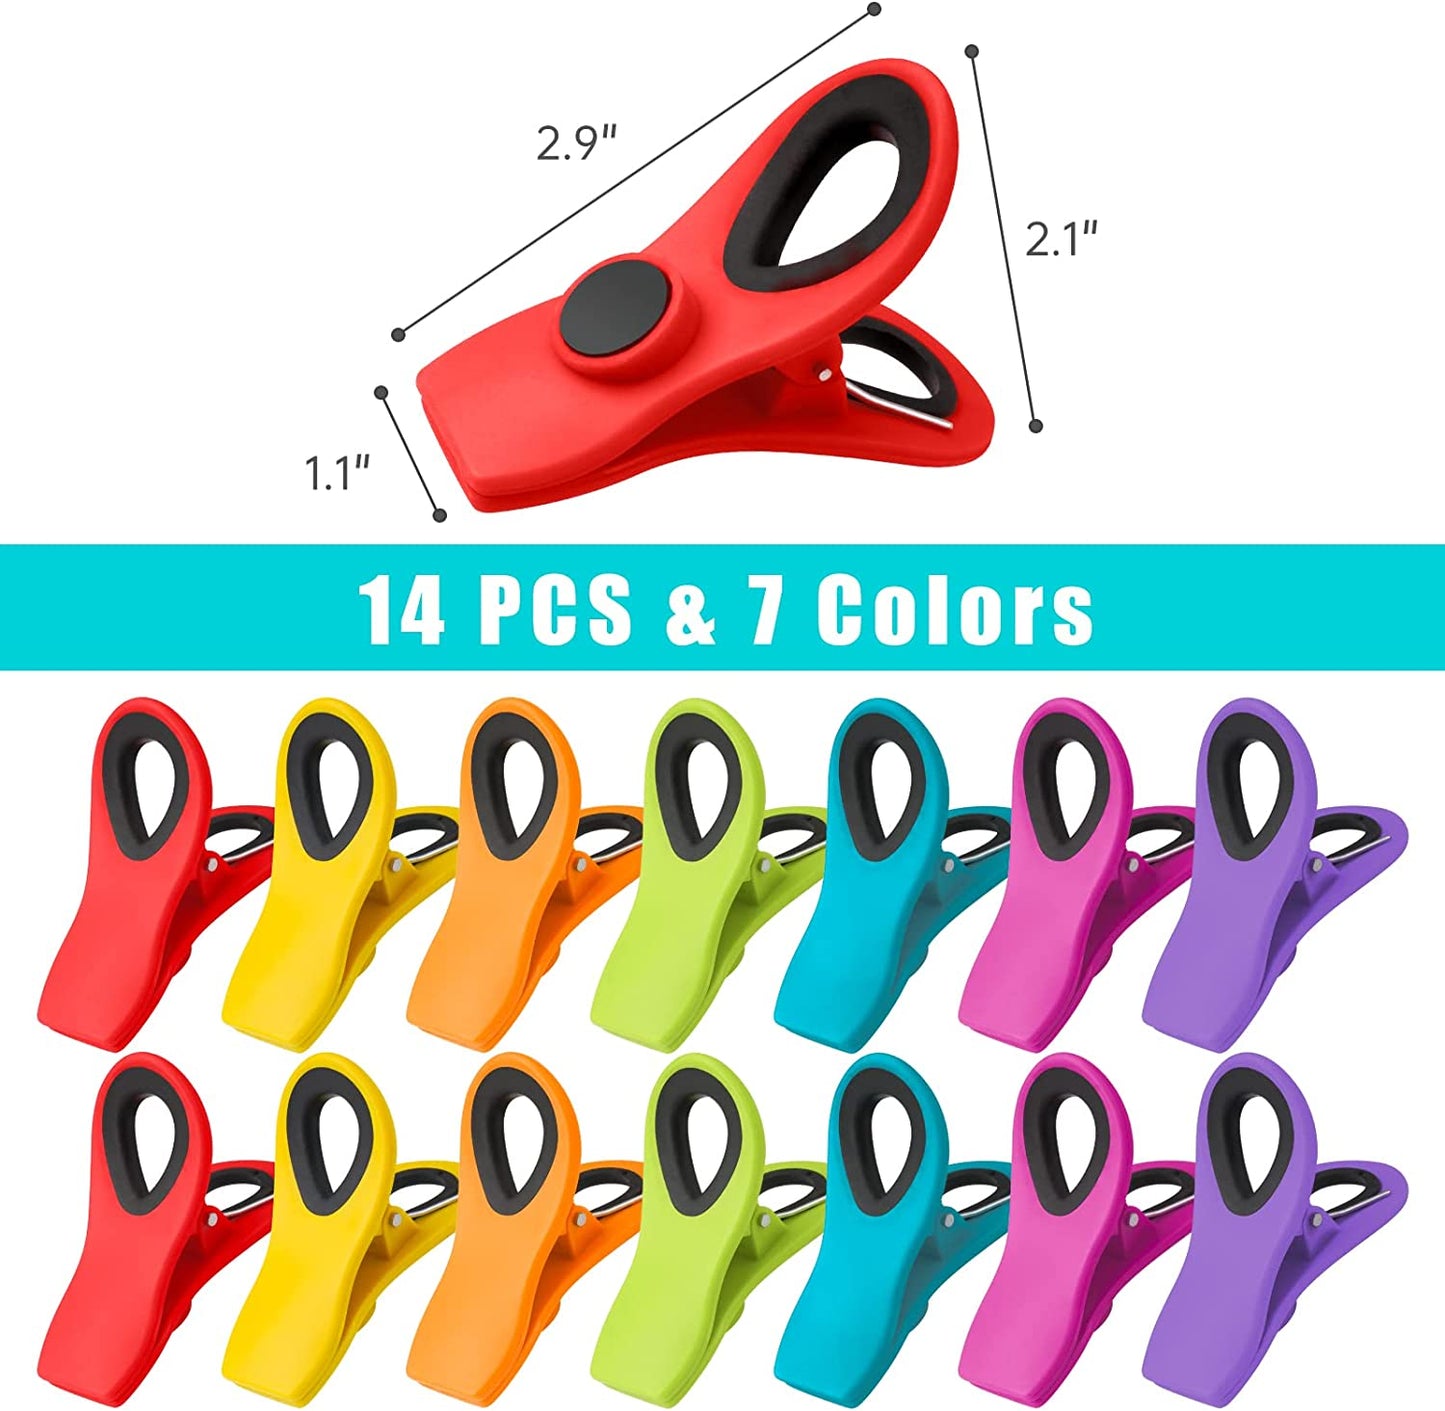 Bag Clips with Magnet 14PCS 7 Assorted Bright Colors Refrigerator Magnetic Clips